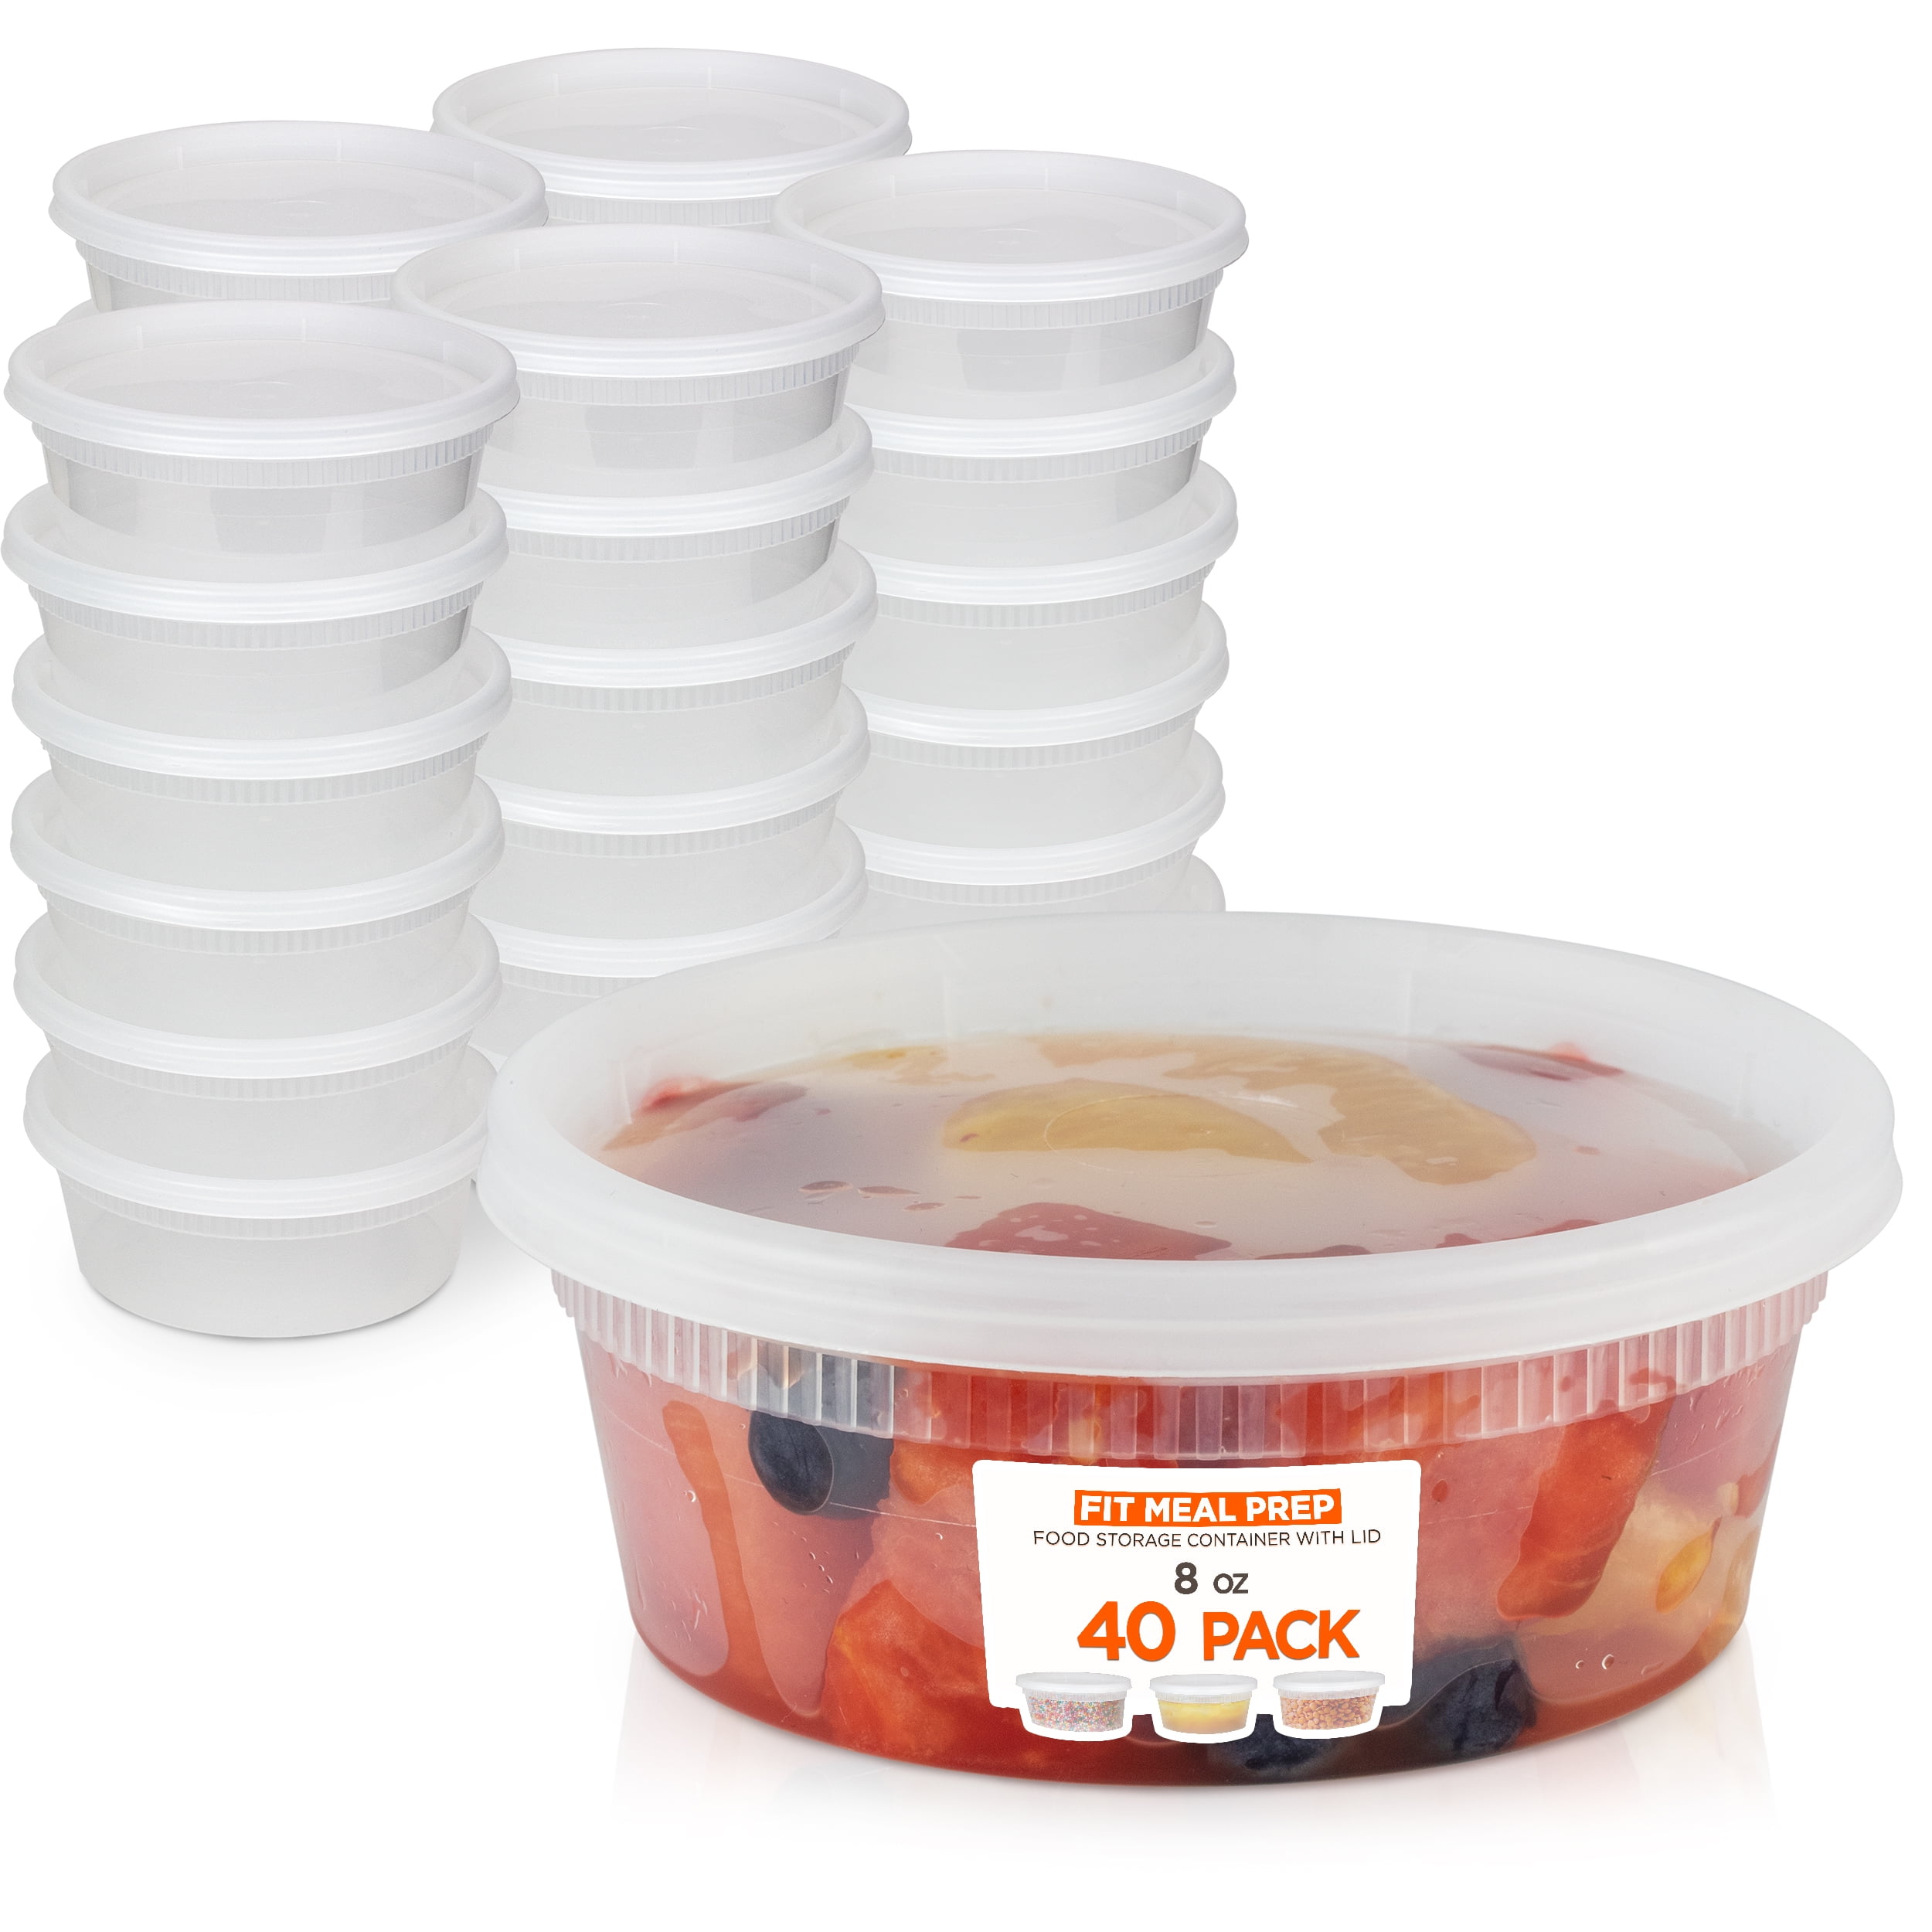 Stack Man Plastic Food Storage Deli Containers with Airtight Lids 8 oz. Case o 